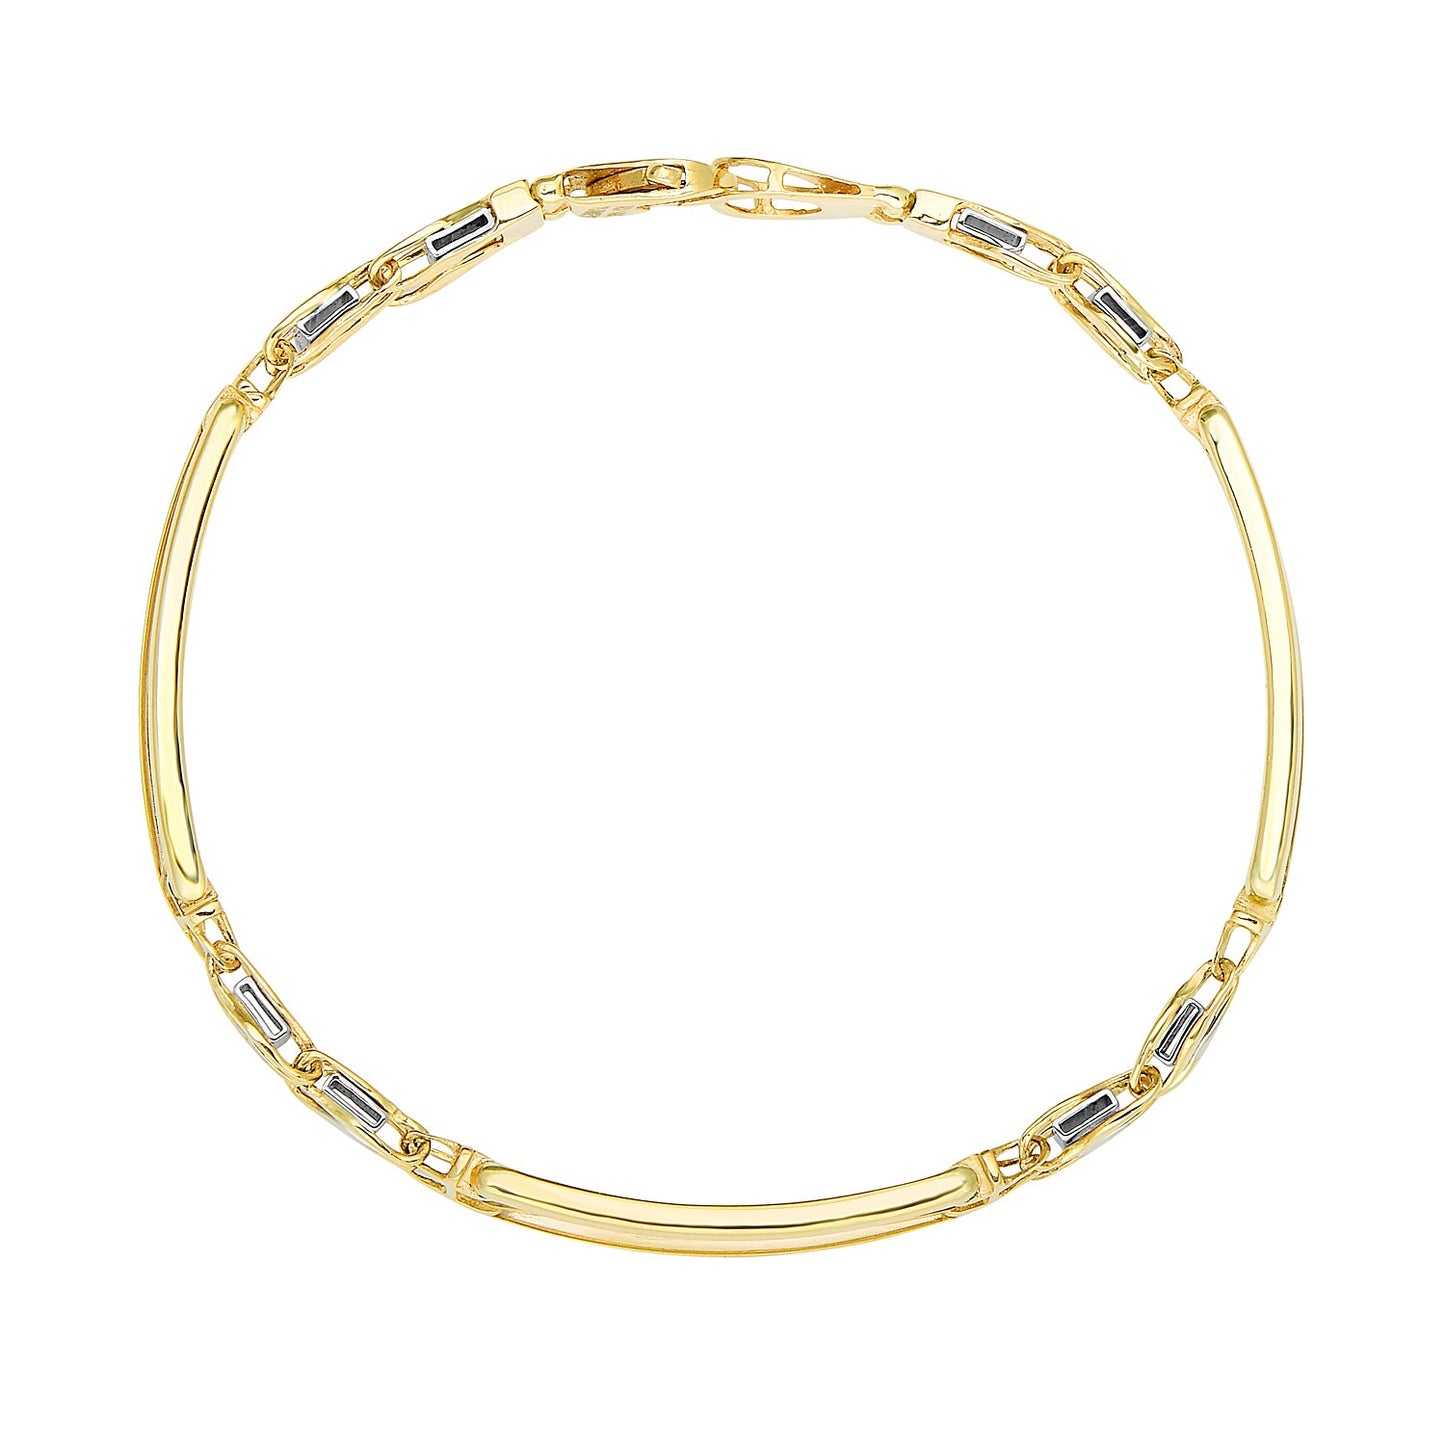 14k Two-Tone Gold Fancy Bar Style Men's Bracelet with Curved Connectors